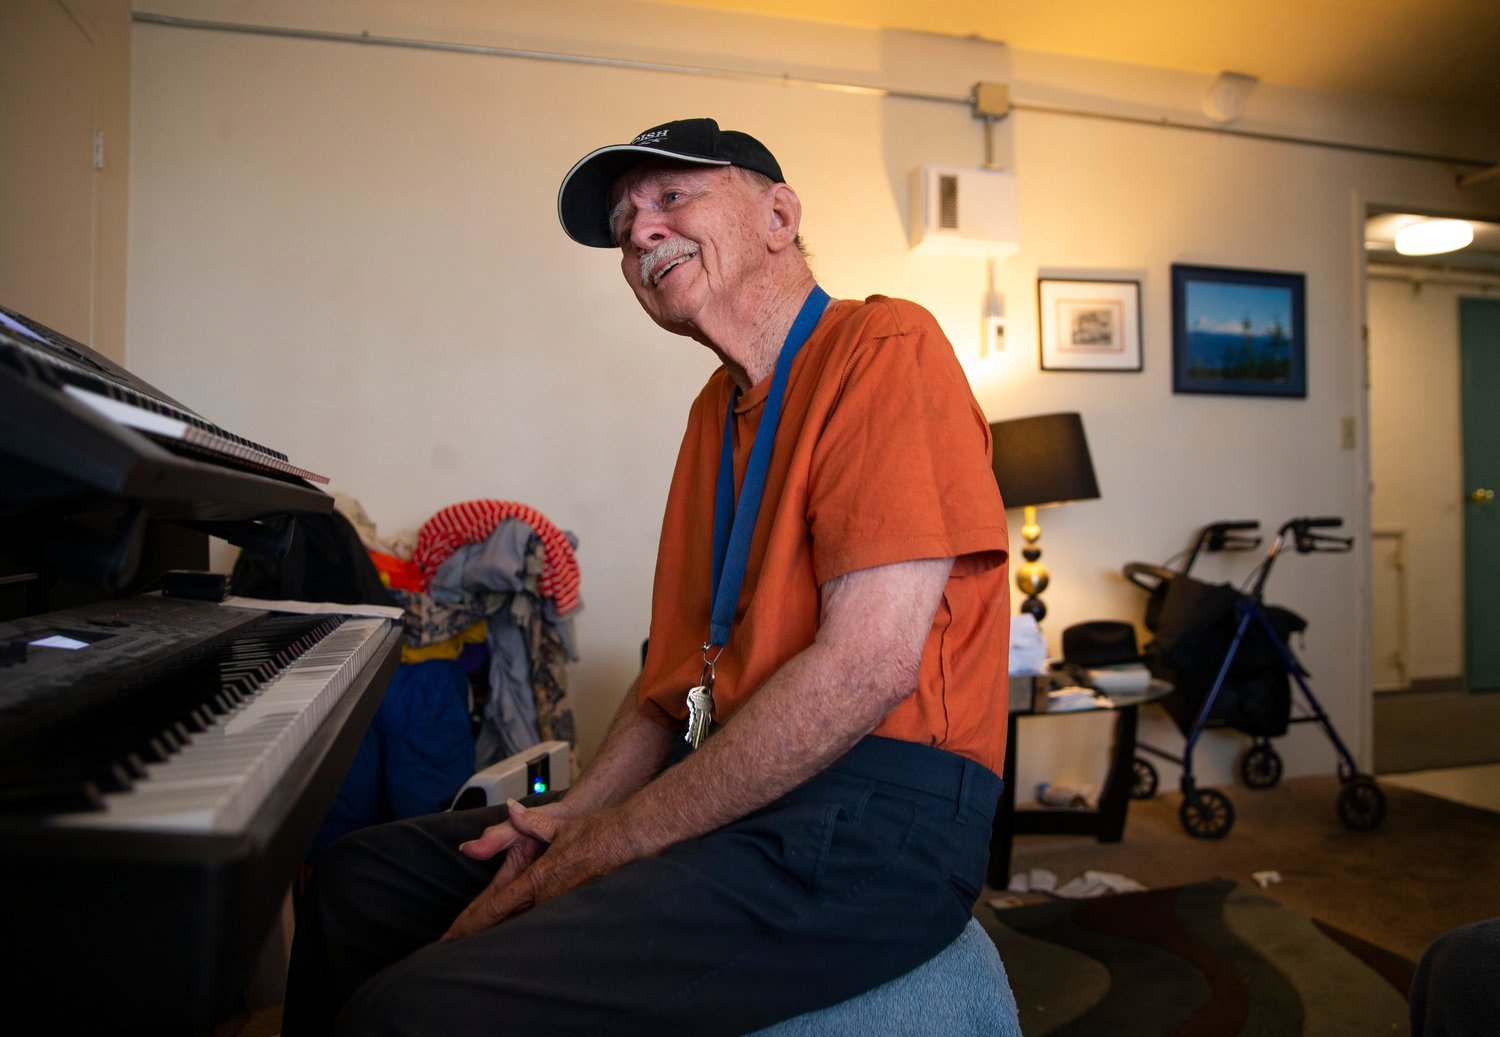 Dudley Kendall Jr. still enjoys playing piano in his Eugene apartment. After witnessing the attack on Pearl Harbor as a 9-year-old Kendall went on to a career as a musician playing jazz throughout the U.S.